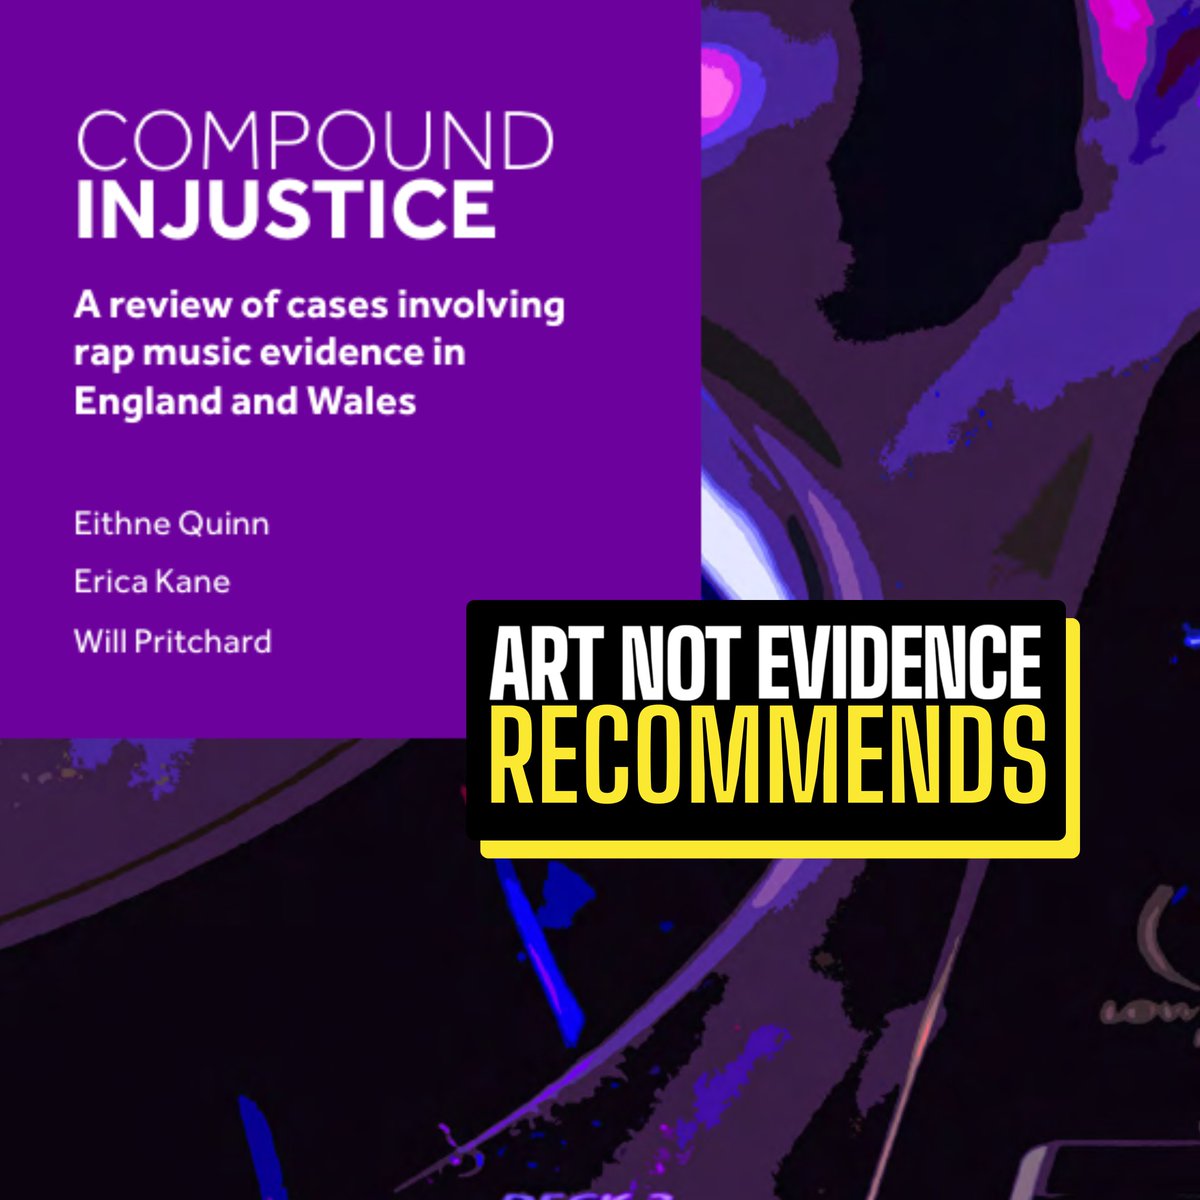 COMPOUND INJUSTICE. The essential new report by Professor @EMaryQ , Erica Kane and @wf_pritchard. It offers the most comprehensive review of rap music-assisted cases to date, with an evaluation of 68 cases involving over 250 defendants. Its findings are alarming.